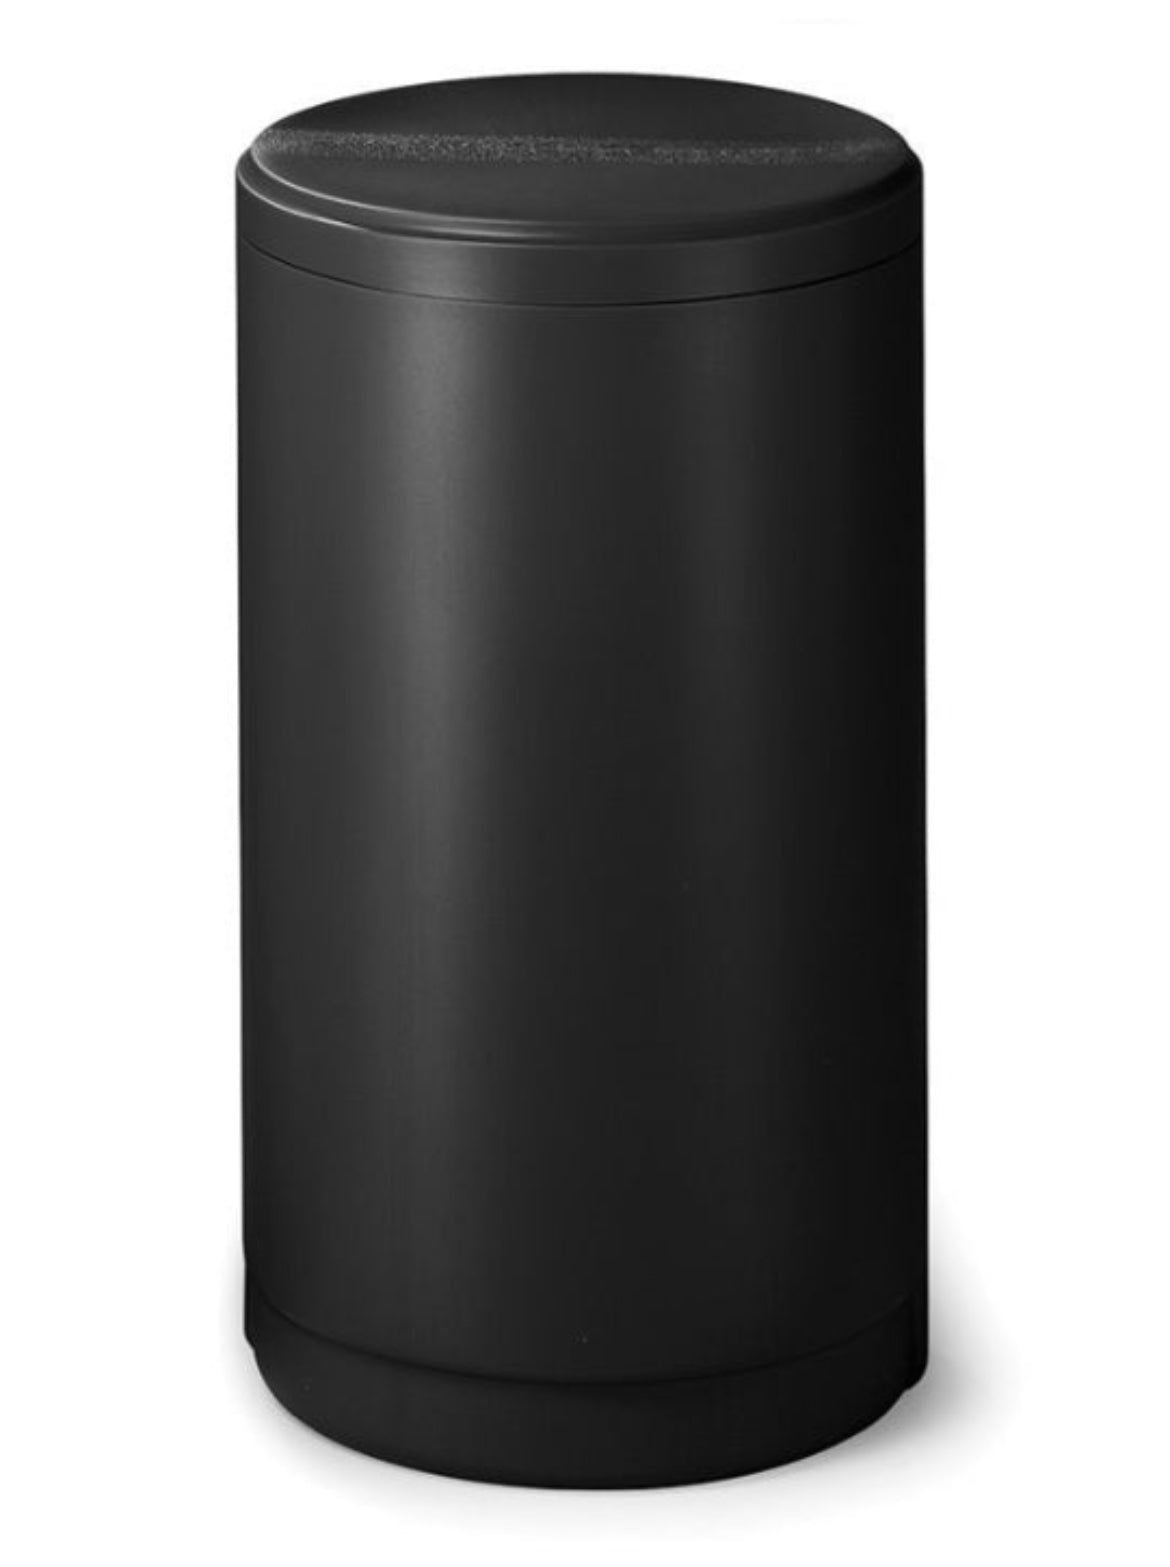 Brine Tank 24x50 Round Black with cover only